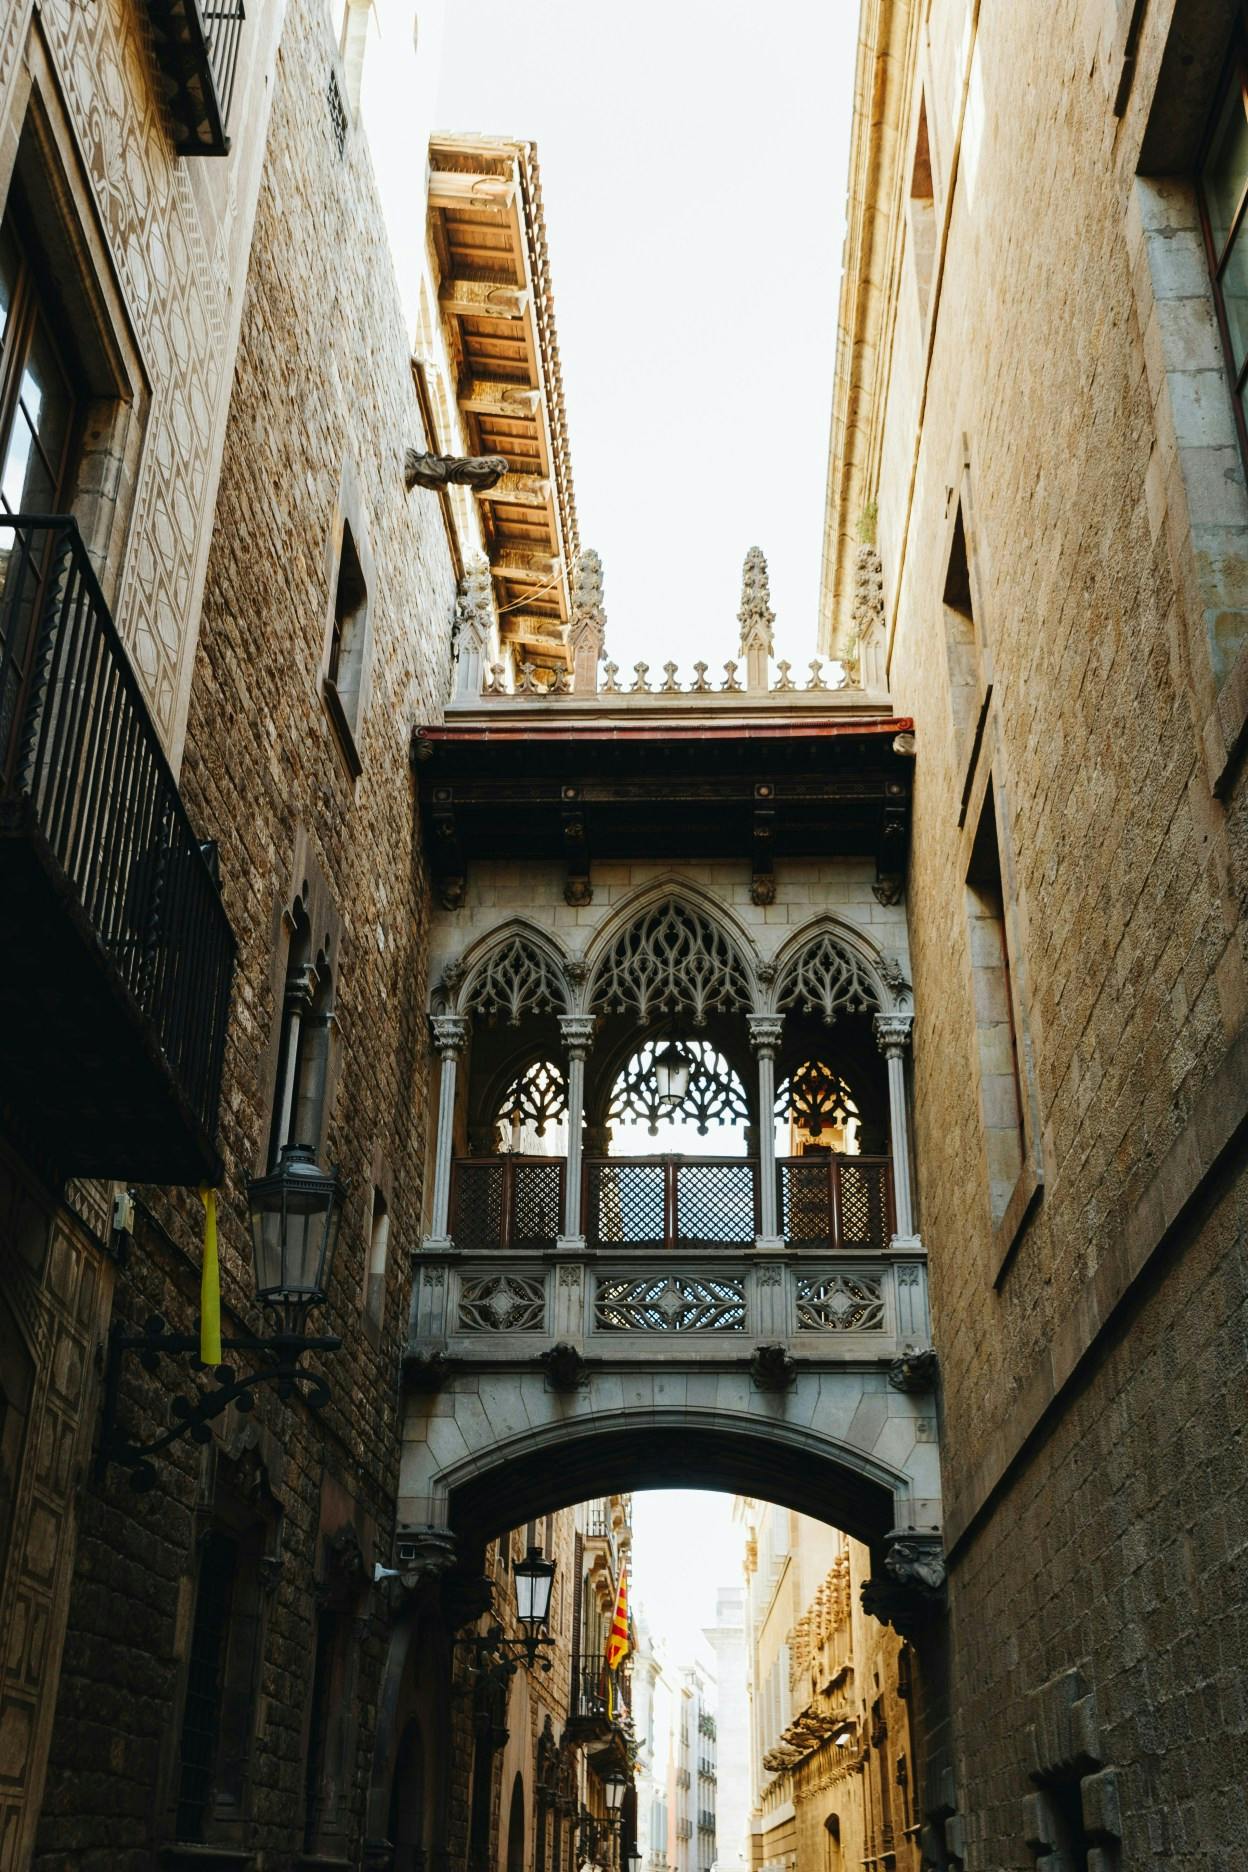 Between two stone buildings, a gothic and medieval bridge passageway connects the two. There are window openings to look down at the alley below. Taken in the Gothic Quarter of Barcelona, Spain. 